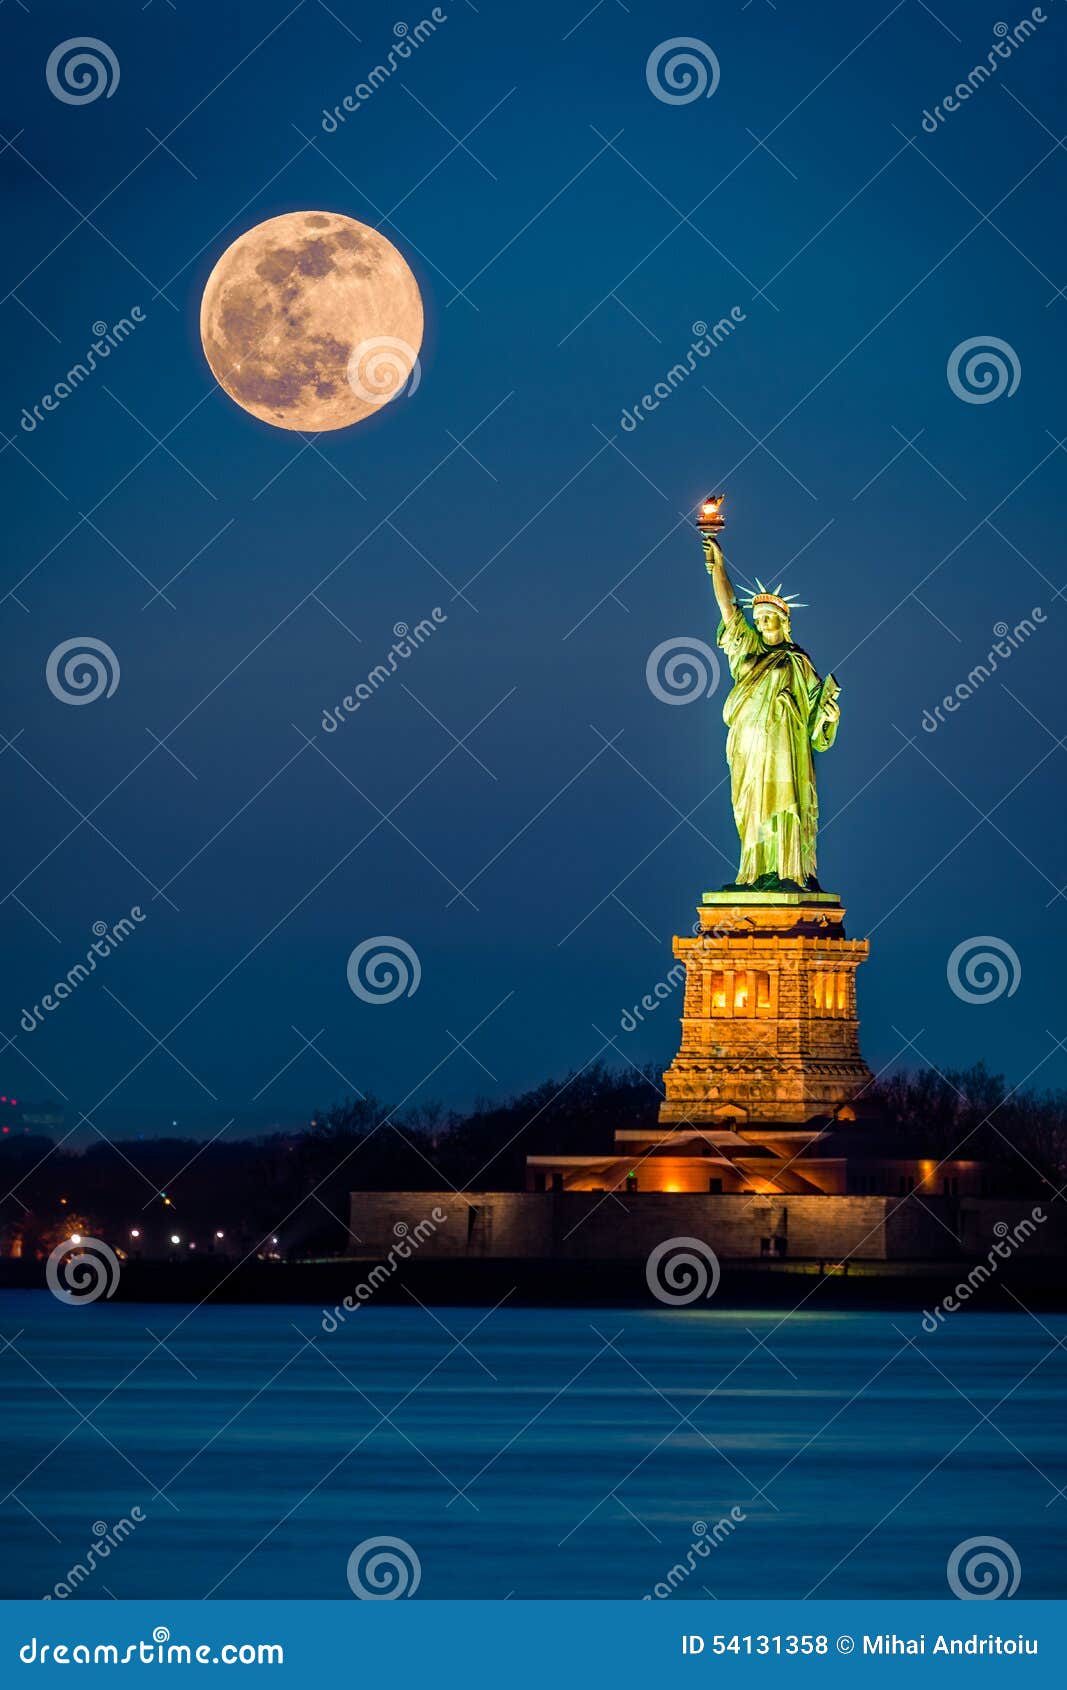 statue of liberty and a rising supermoon